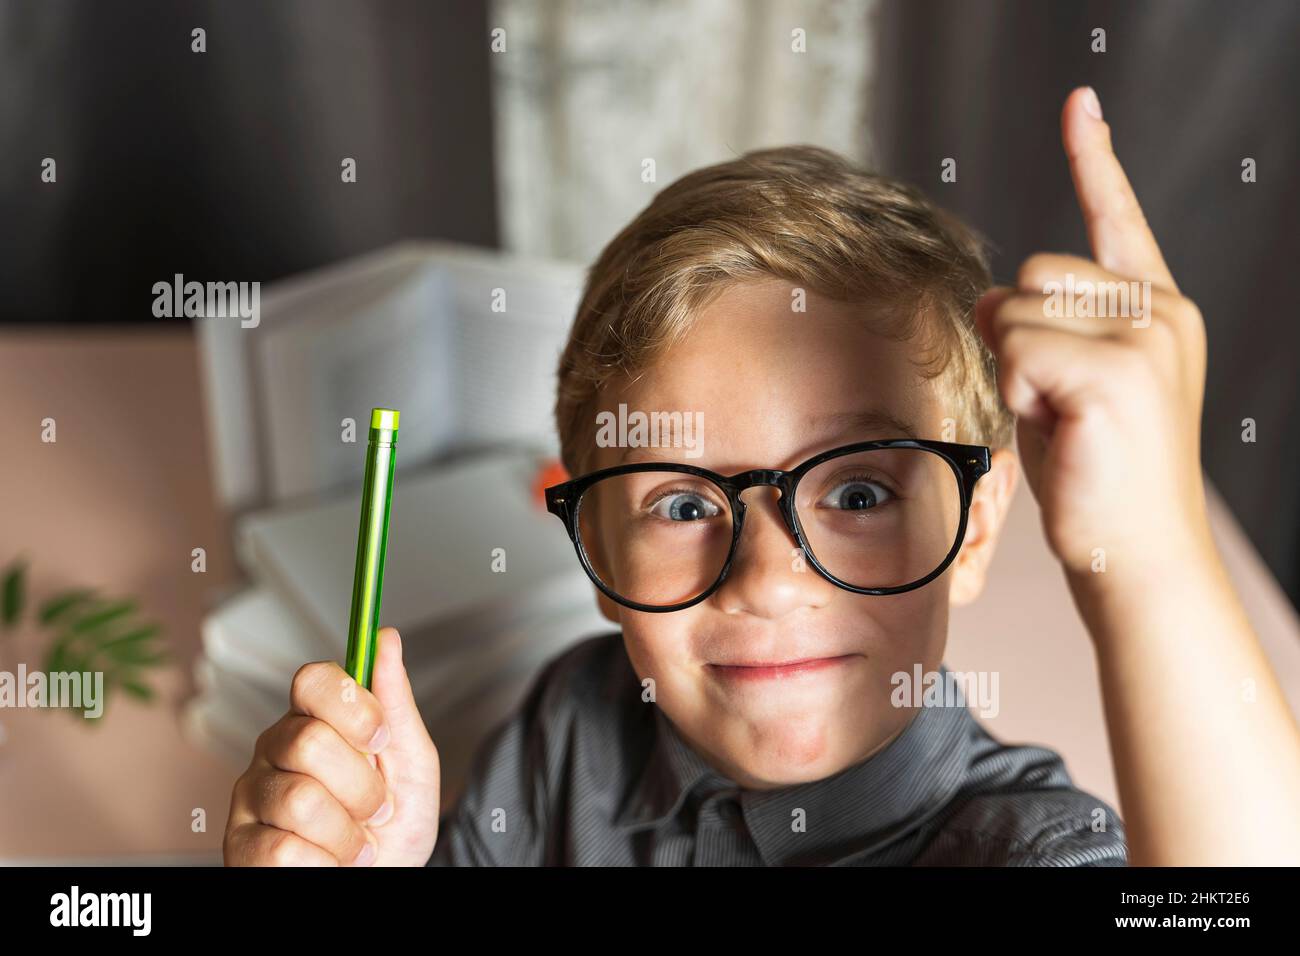 A smart boy with glasses enthusiastically raises his finger up, the concept of learning, curiosity and new discoveries, against the background of text Stock Photo